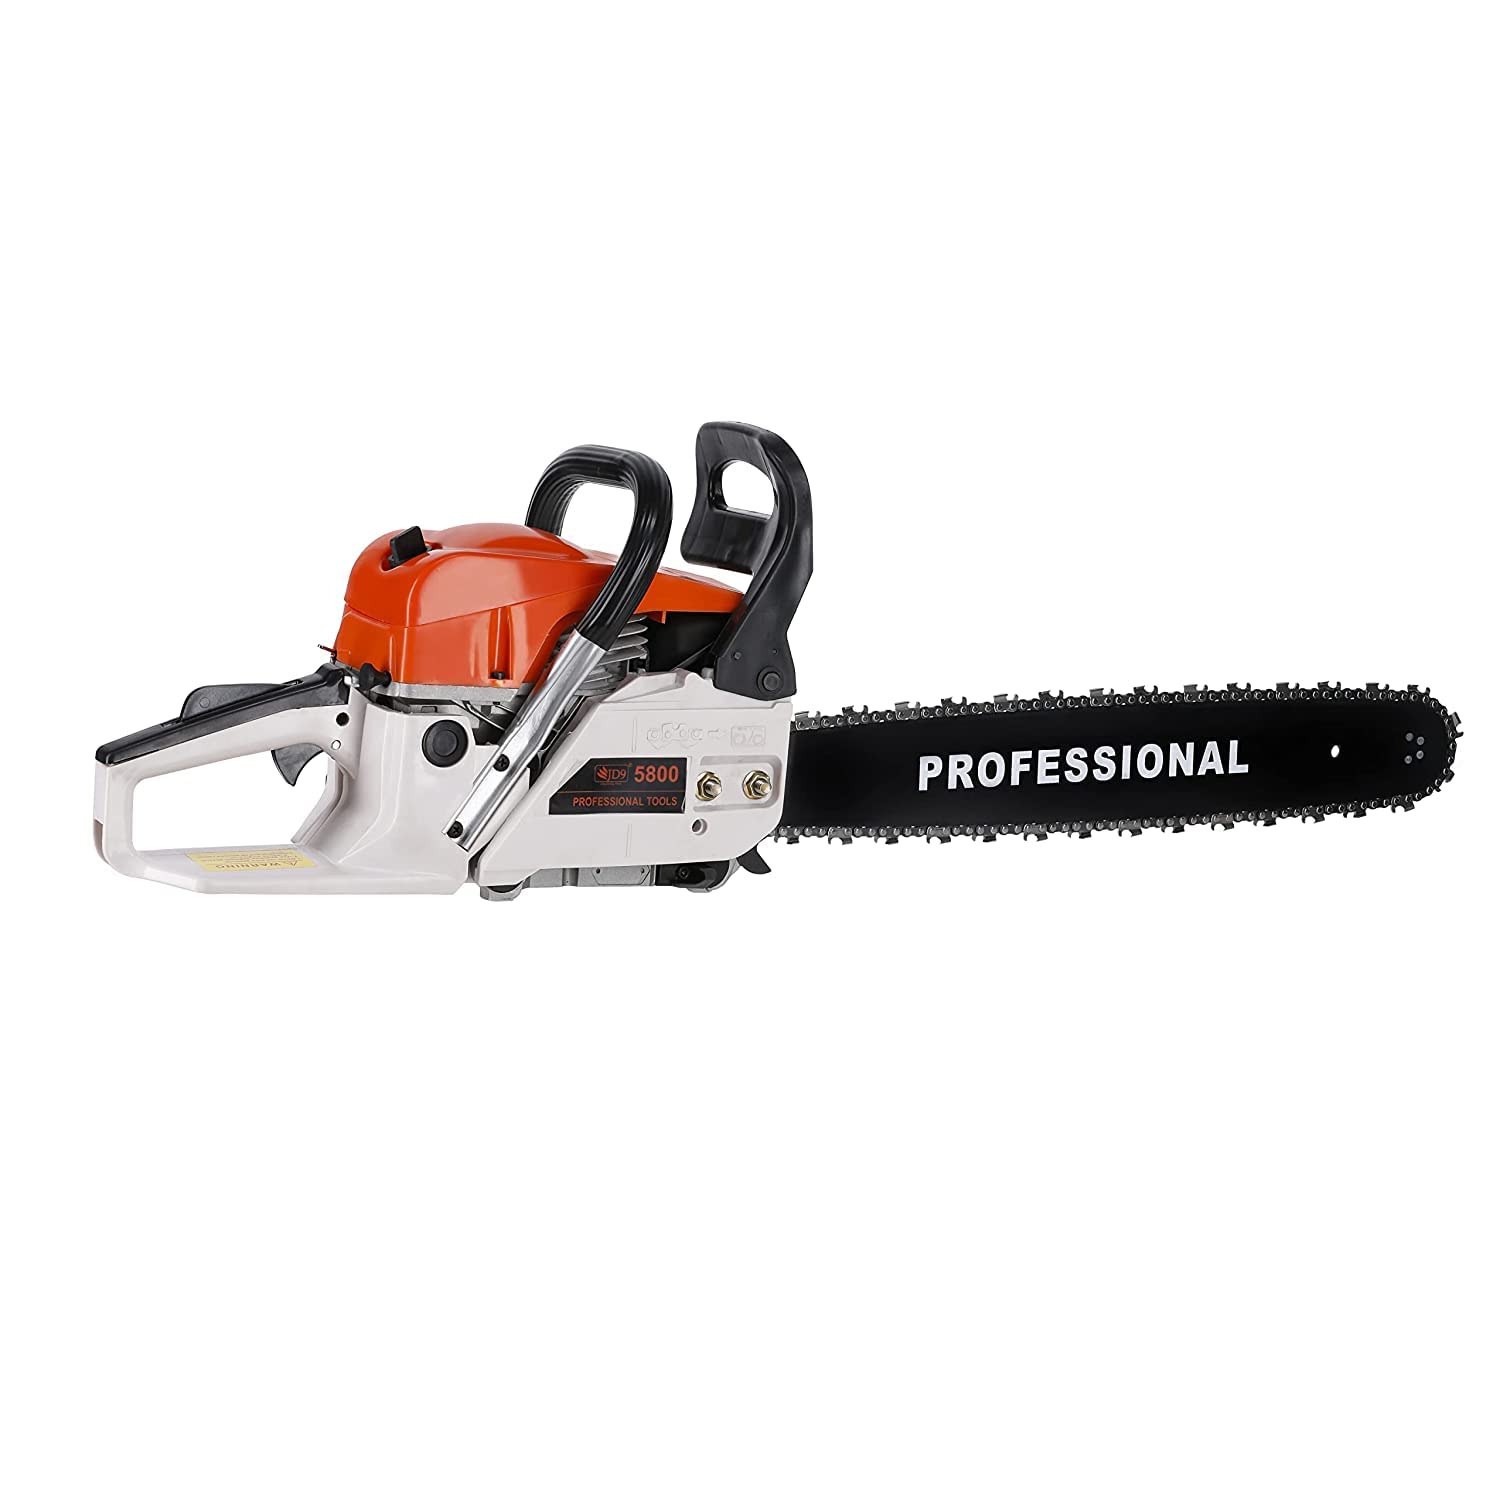 JD9 20" Professional Heavy Duty Chainsaw, 58CC 3.5 KW 12500 RPM Powerful Handed Petrol Chain Saw, Woodcutting Saw for Farm, Garden and Ranch with Tool Kit